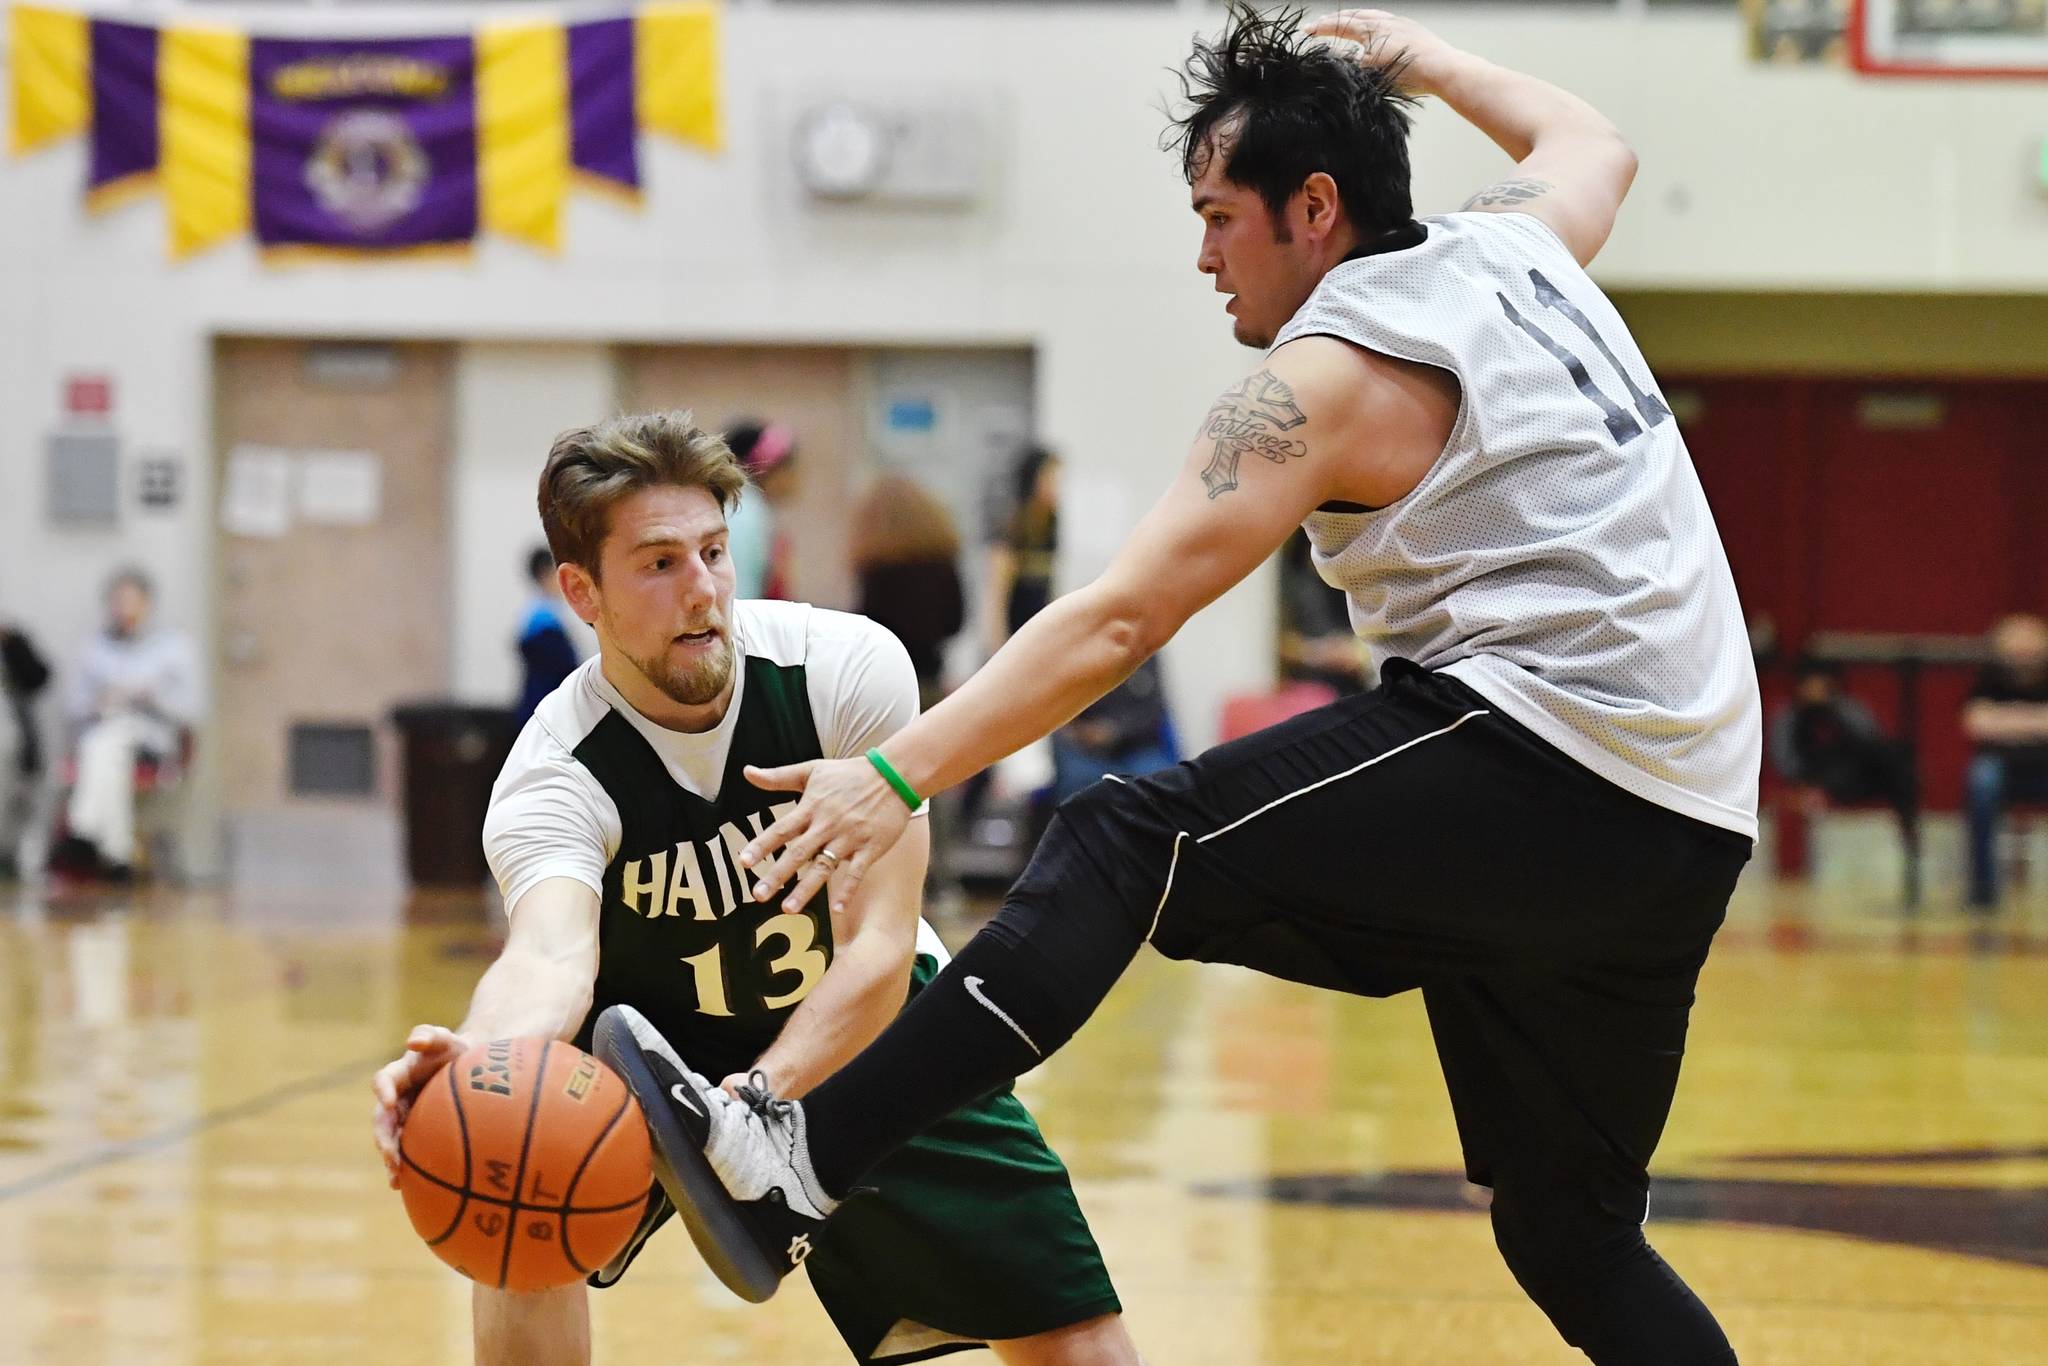 Metlakatla’s Shane Martinez, right, gets a foot on the ball against Haines’ Orion Farley during their B bracket game at the Gold Medal Basketball Tournament on Friday, March 22, 2019. (Michael Penn | Juneau Empire)